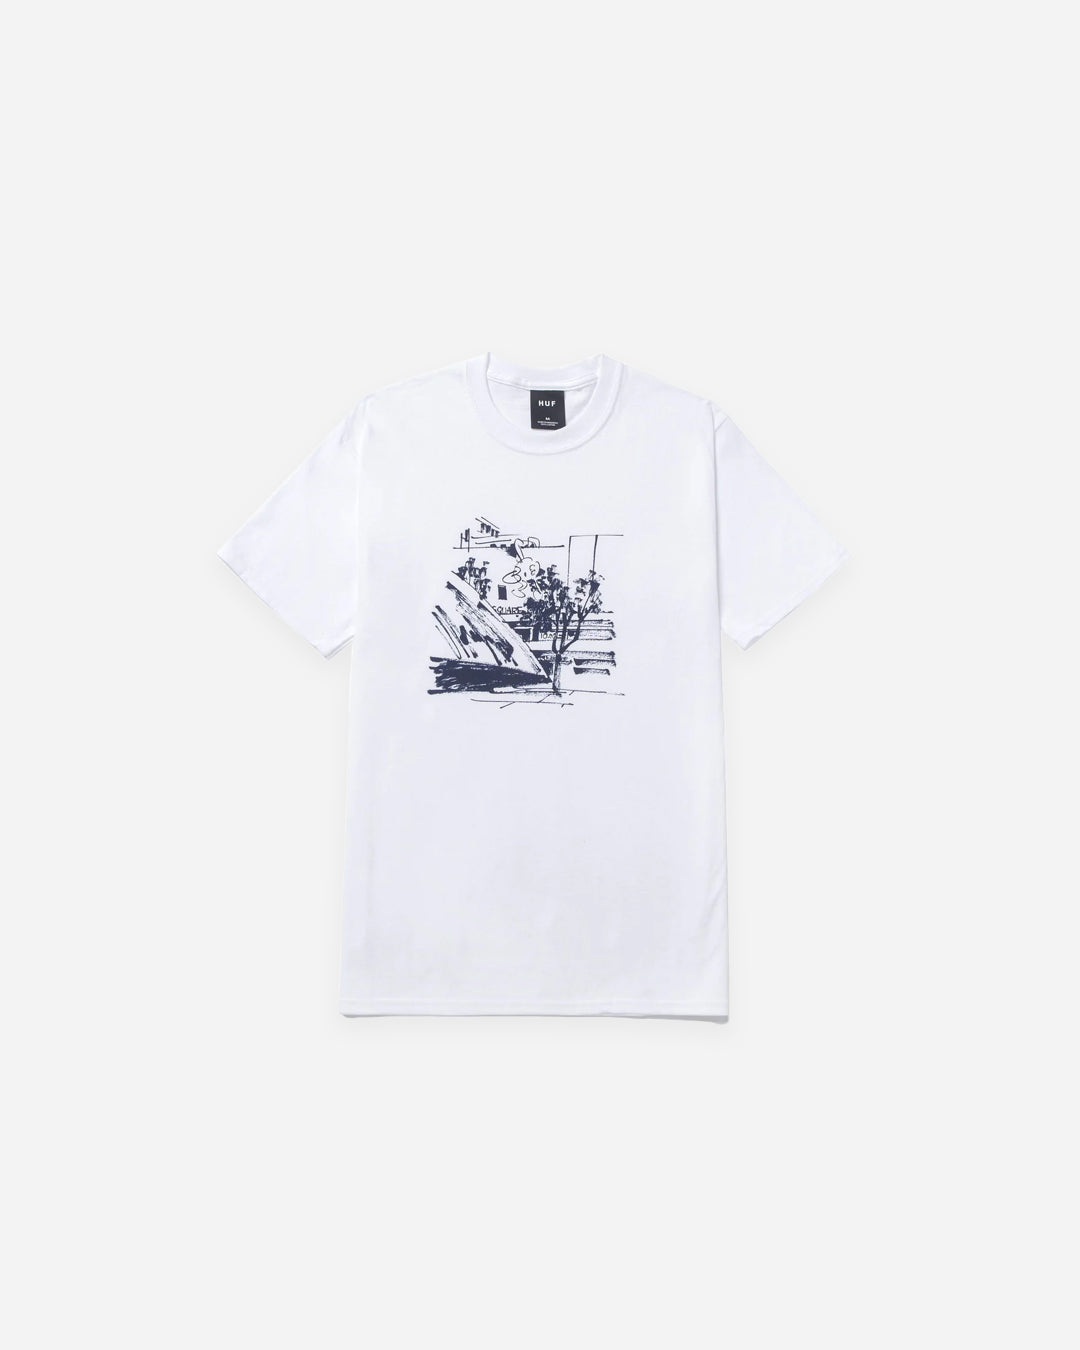 JAMES JARVIS UP S/S TEE